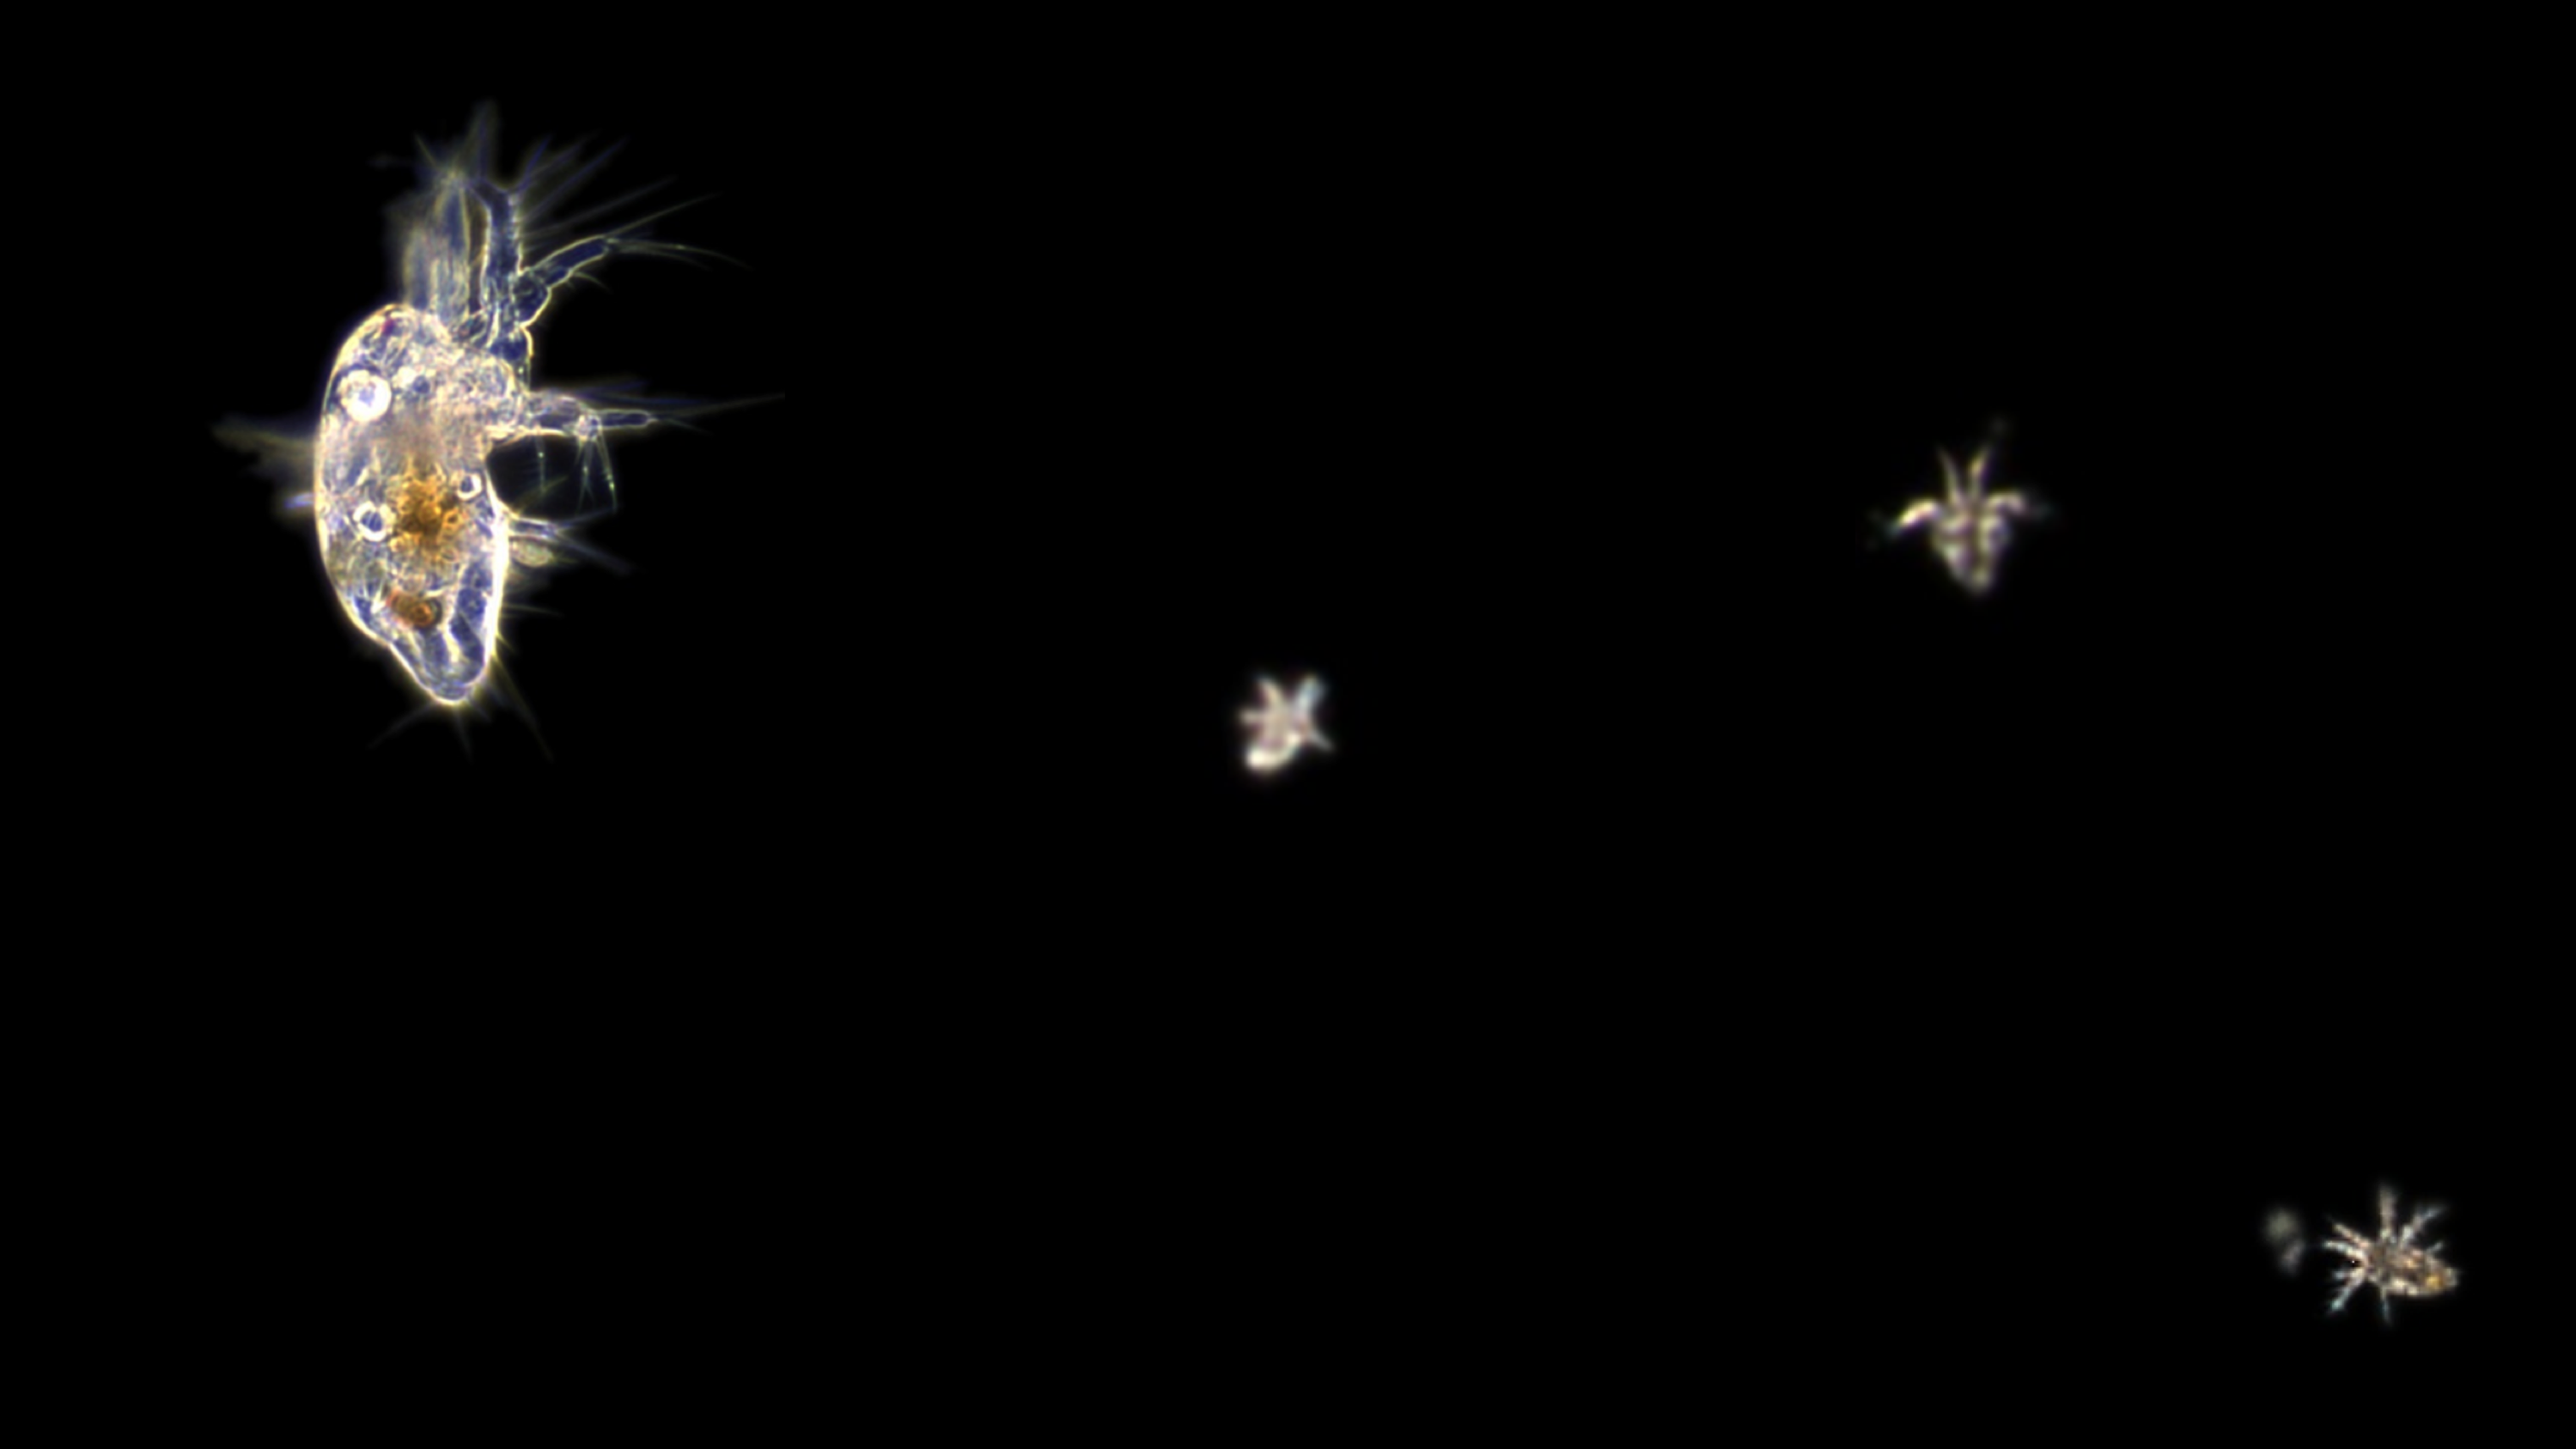 A collage of plankton images from our underwater camera